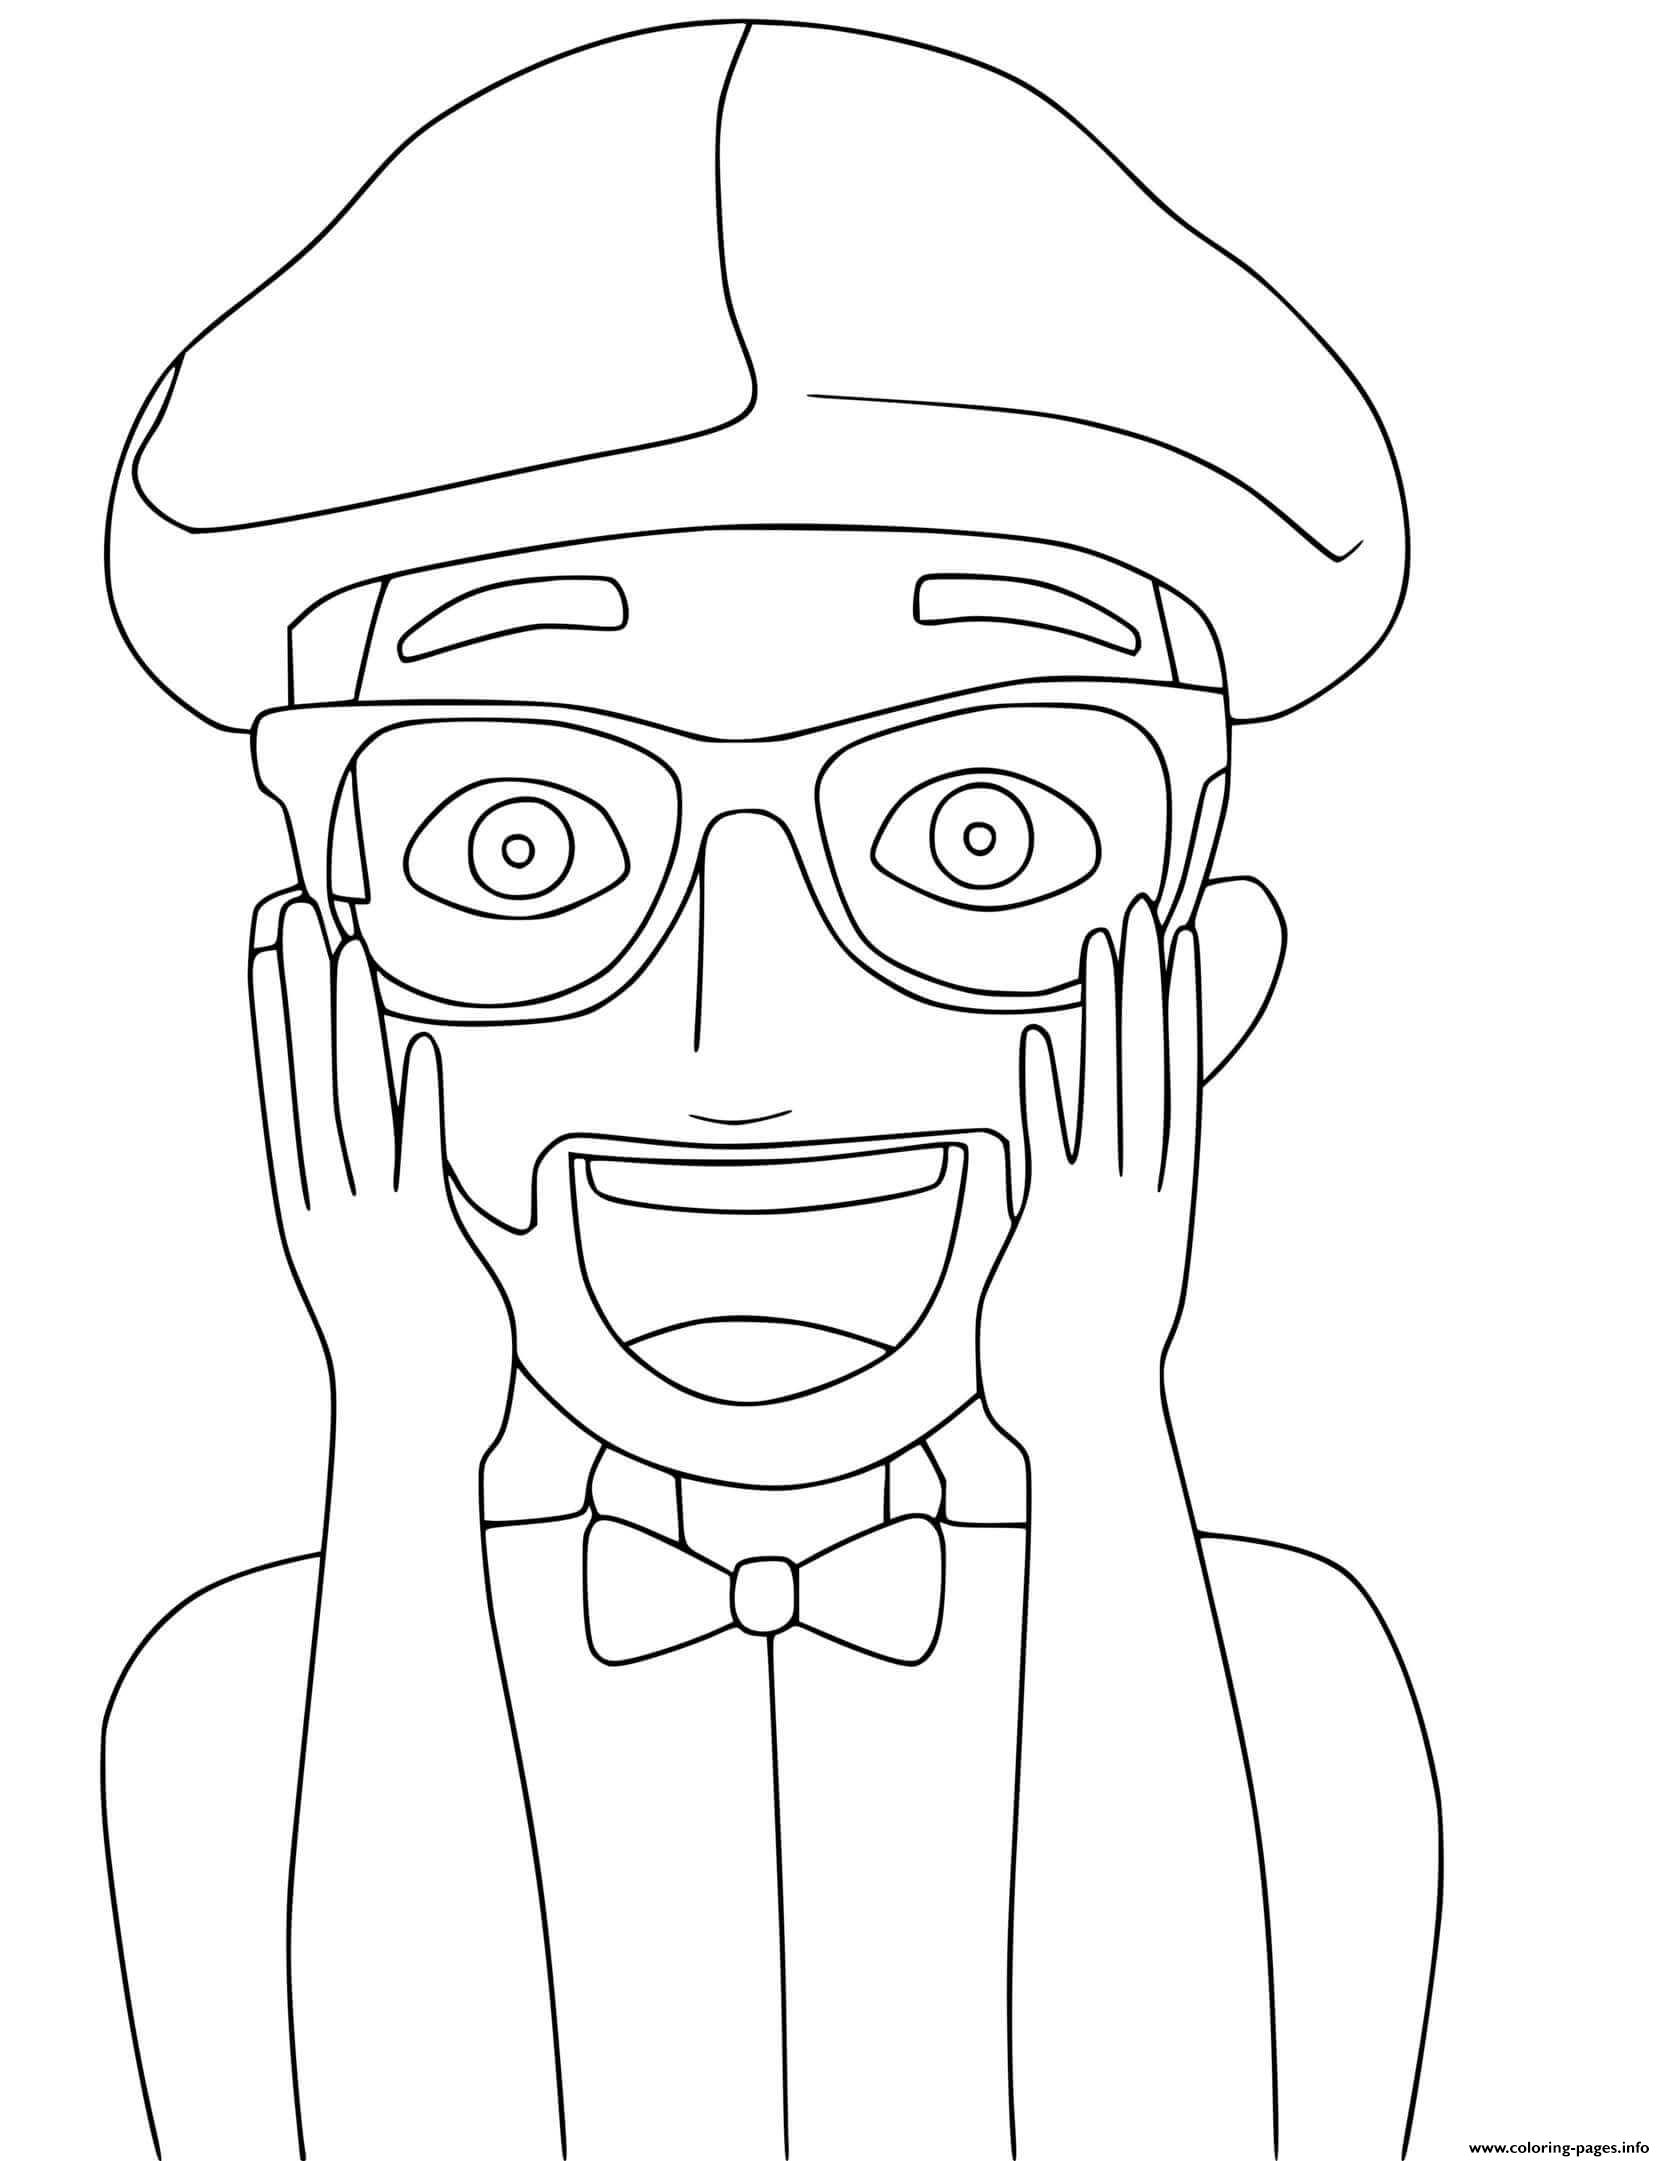 Blippi is excited and happy coloring page printable